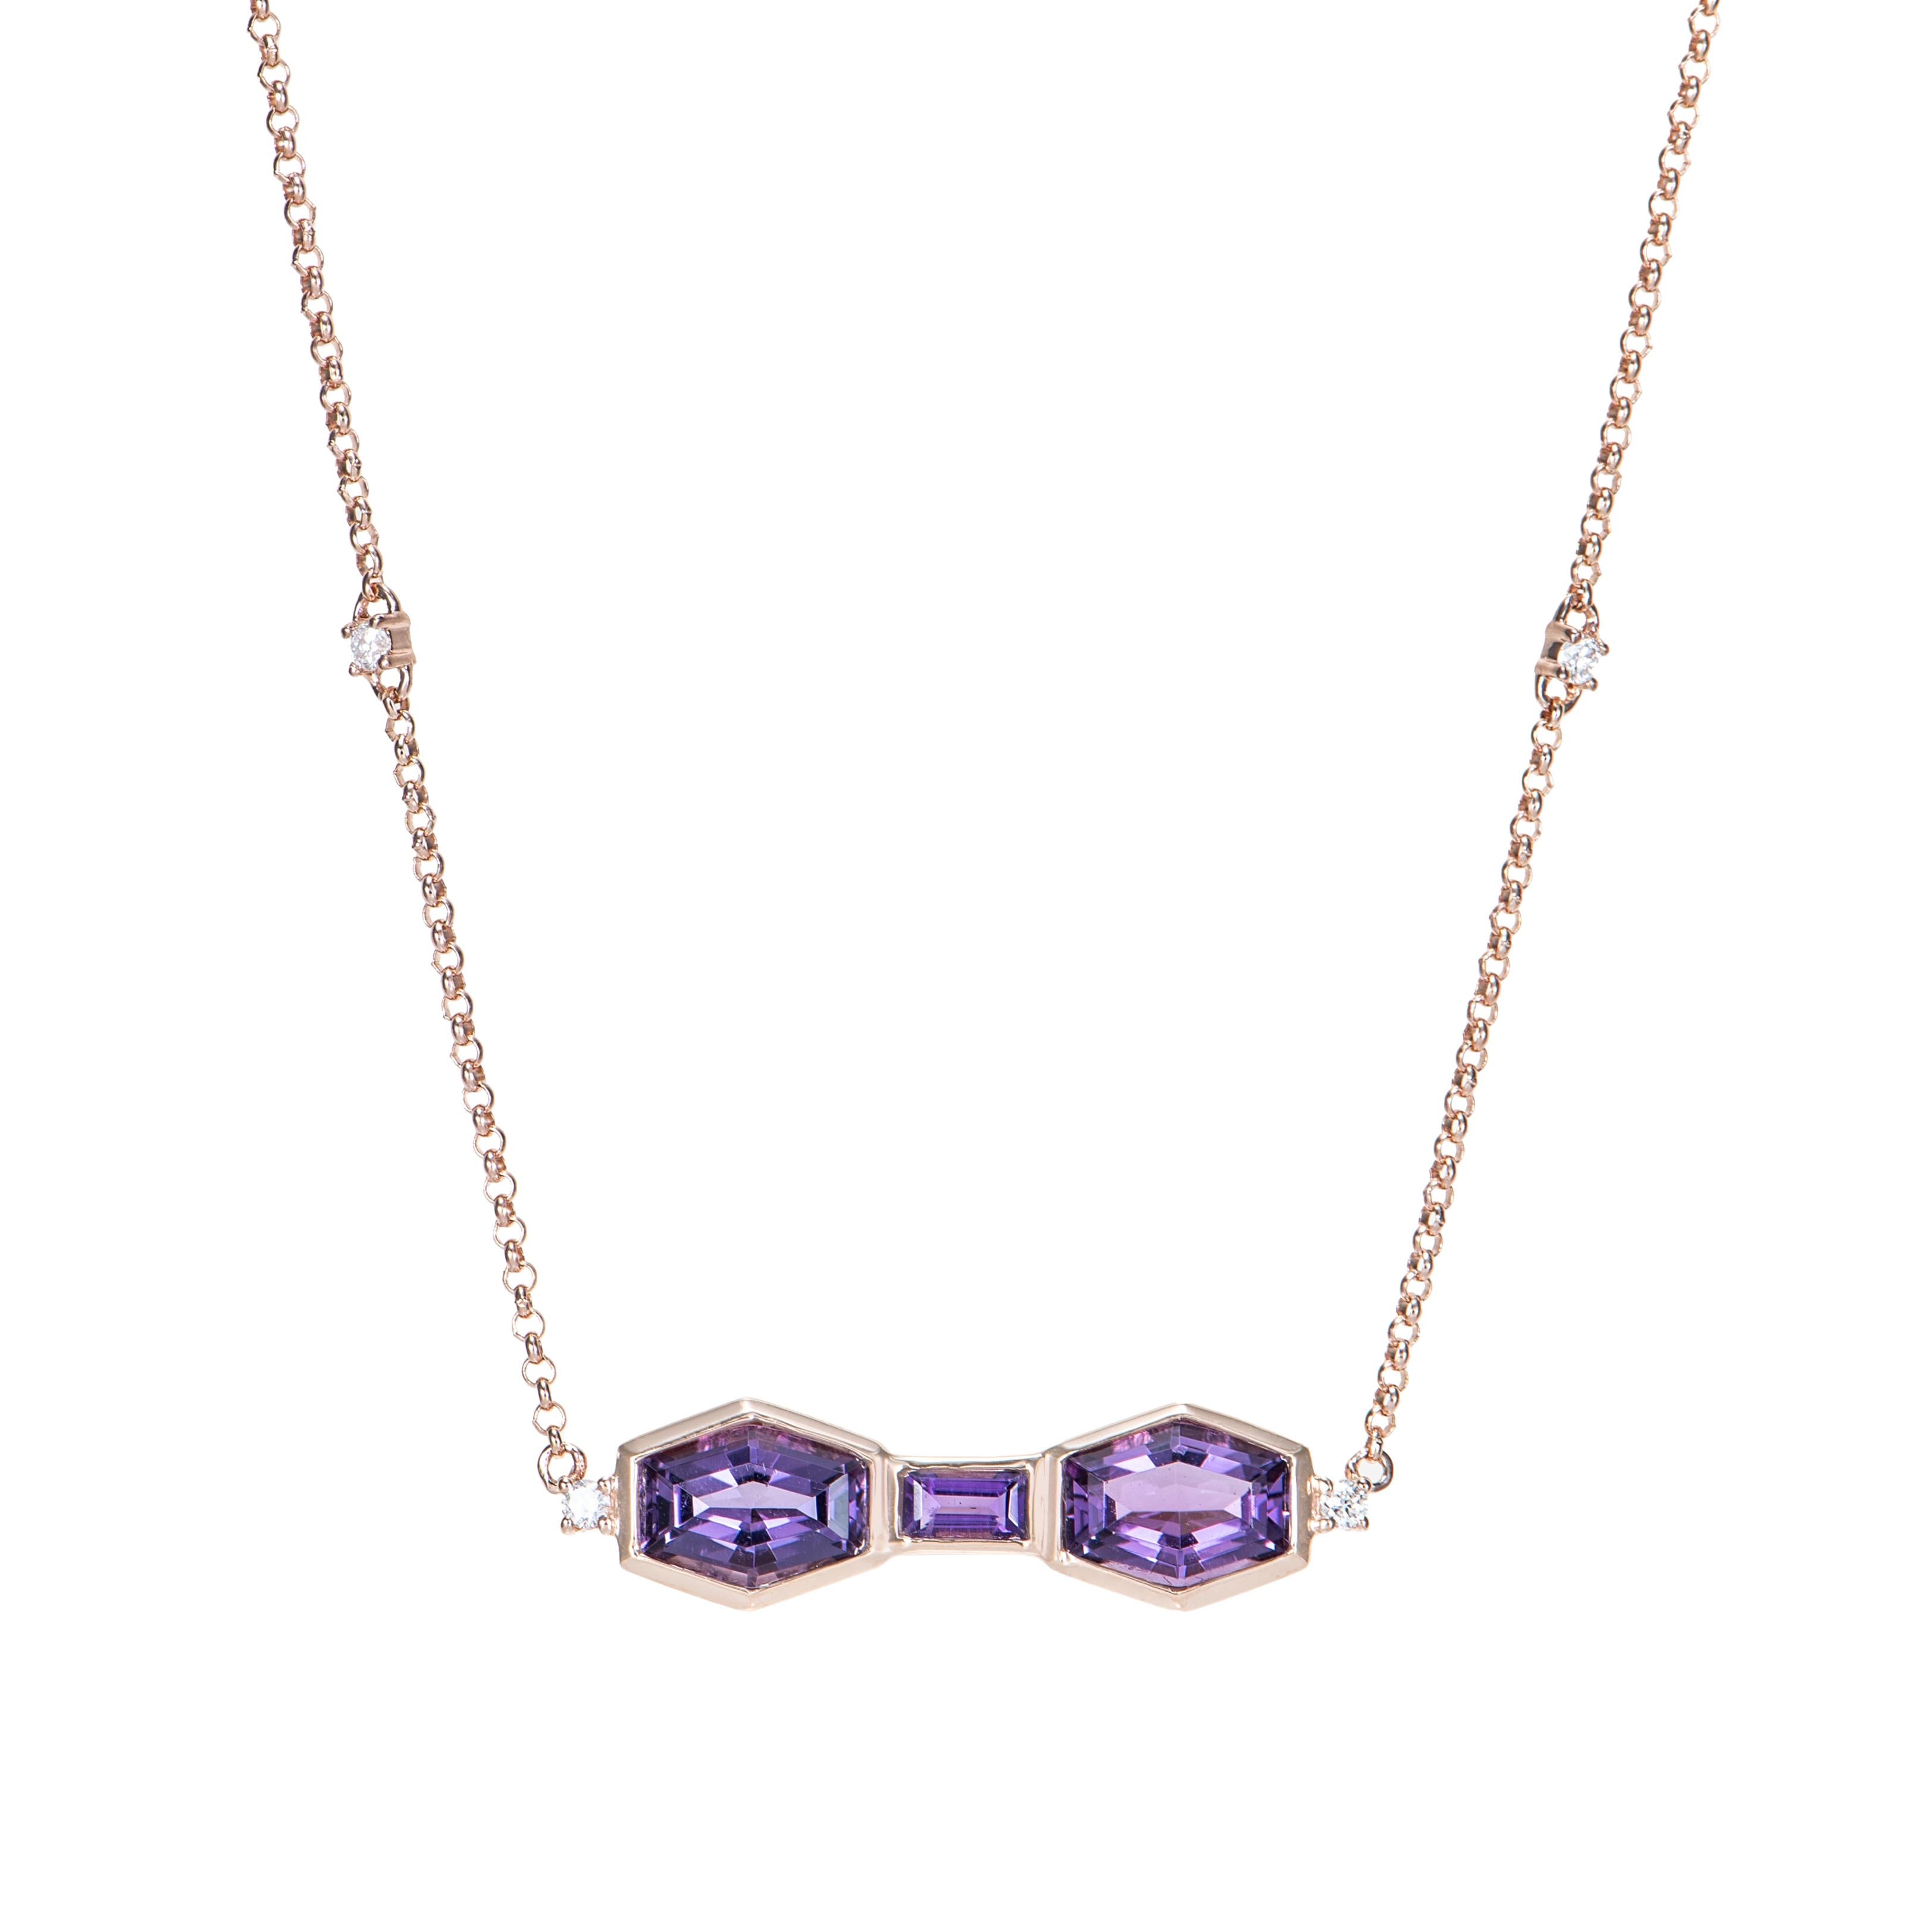 It is Fancy Amethyst Pendant in Hexagon shape with purple hue. This rose gold Pendant have a timeless, elegant appearance and can be worn on different occasions.

Amethyst Pendant in 14Karat Rose Gold with White Diamond.

Amethyst: 1.58 carat, 7X5mm